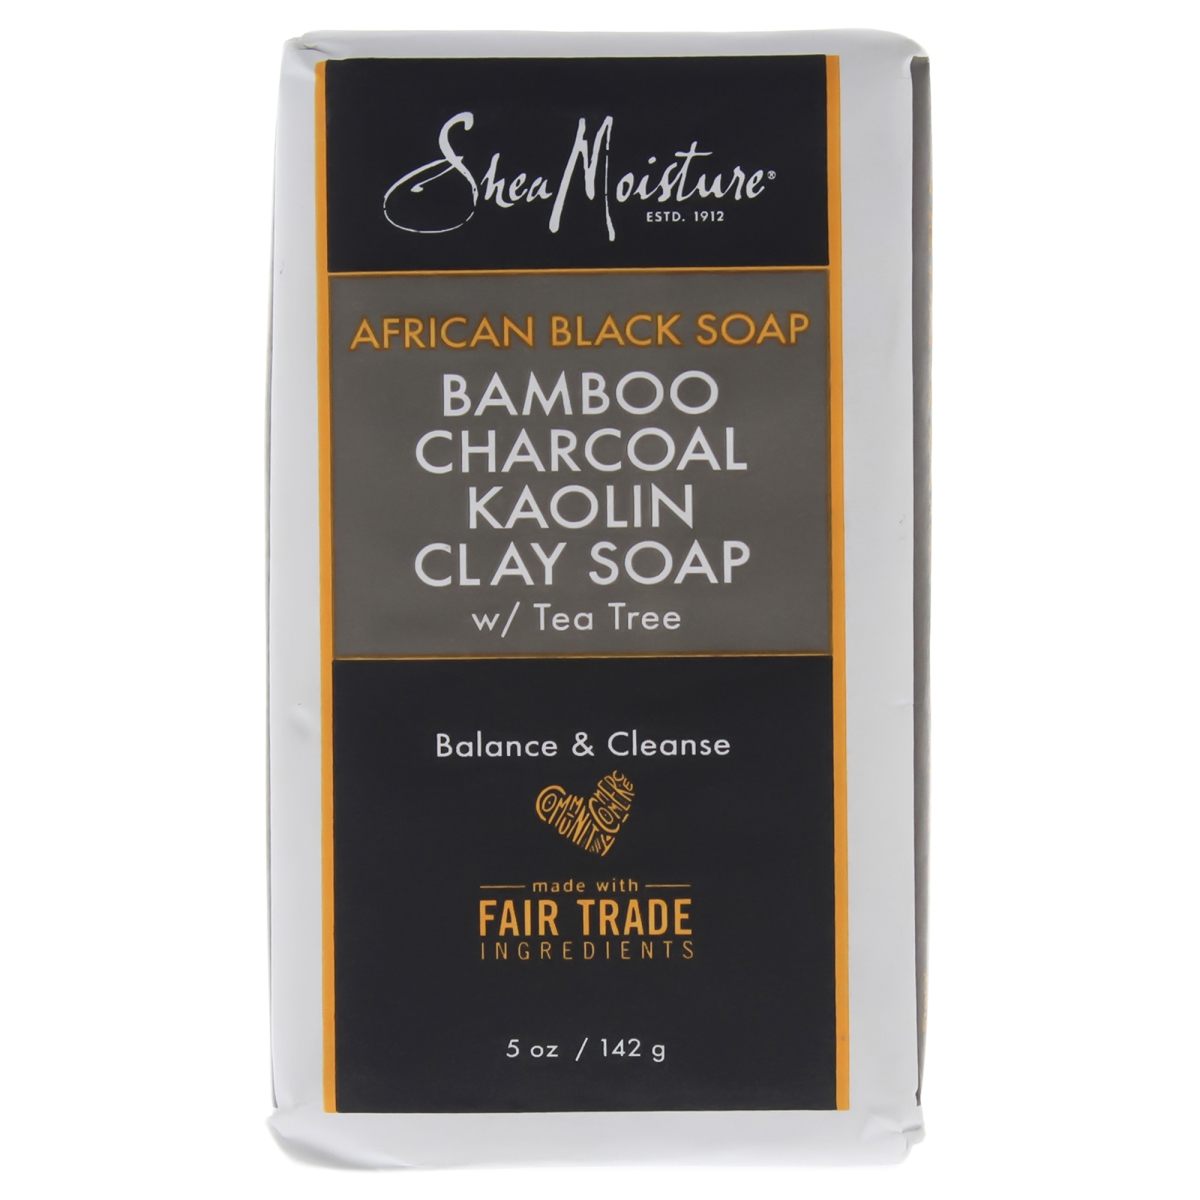 I0084222 African Black Soap Bamboo Charcoal Kaolin Clay Bar Soap For Unisex - 5 Oz